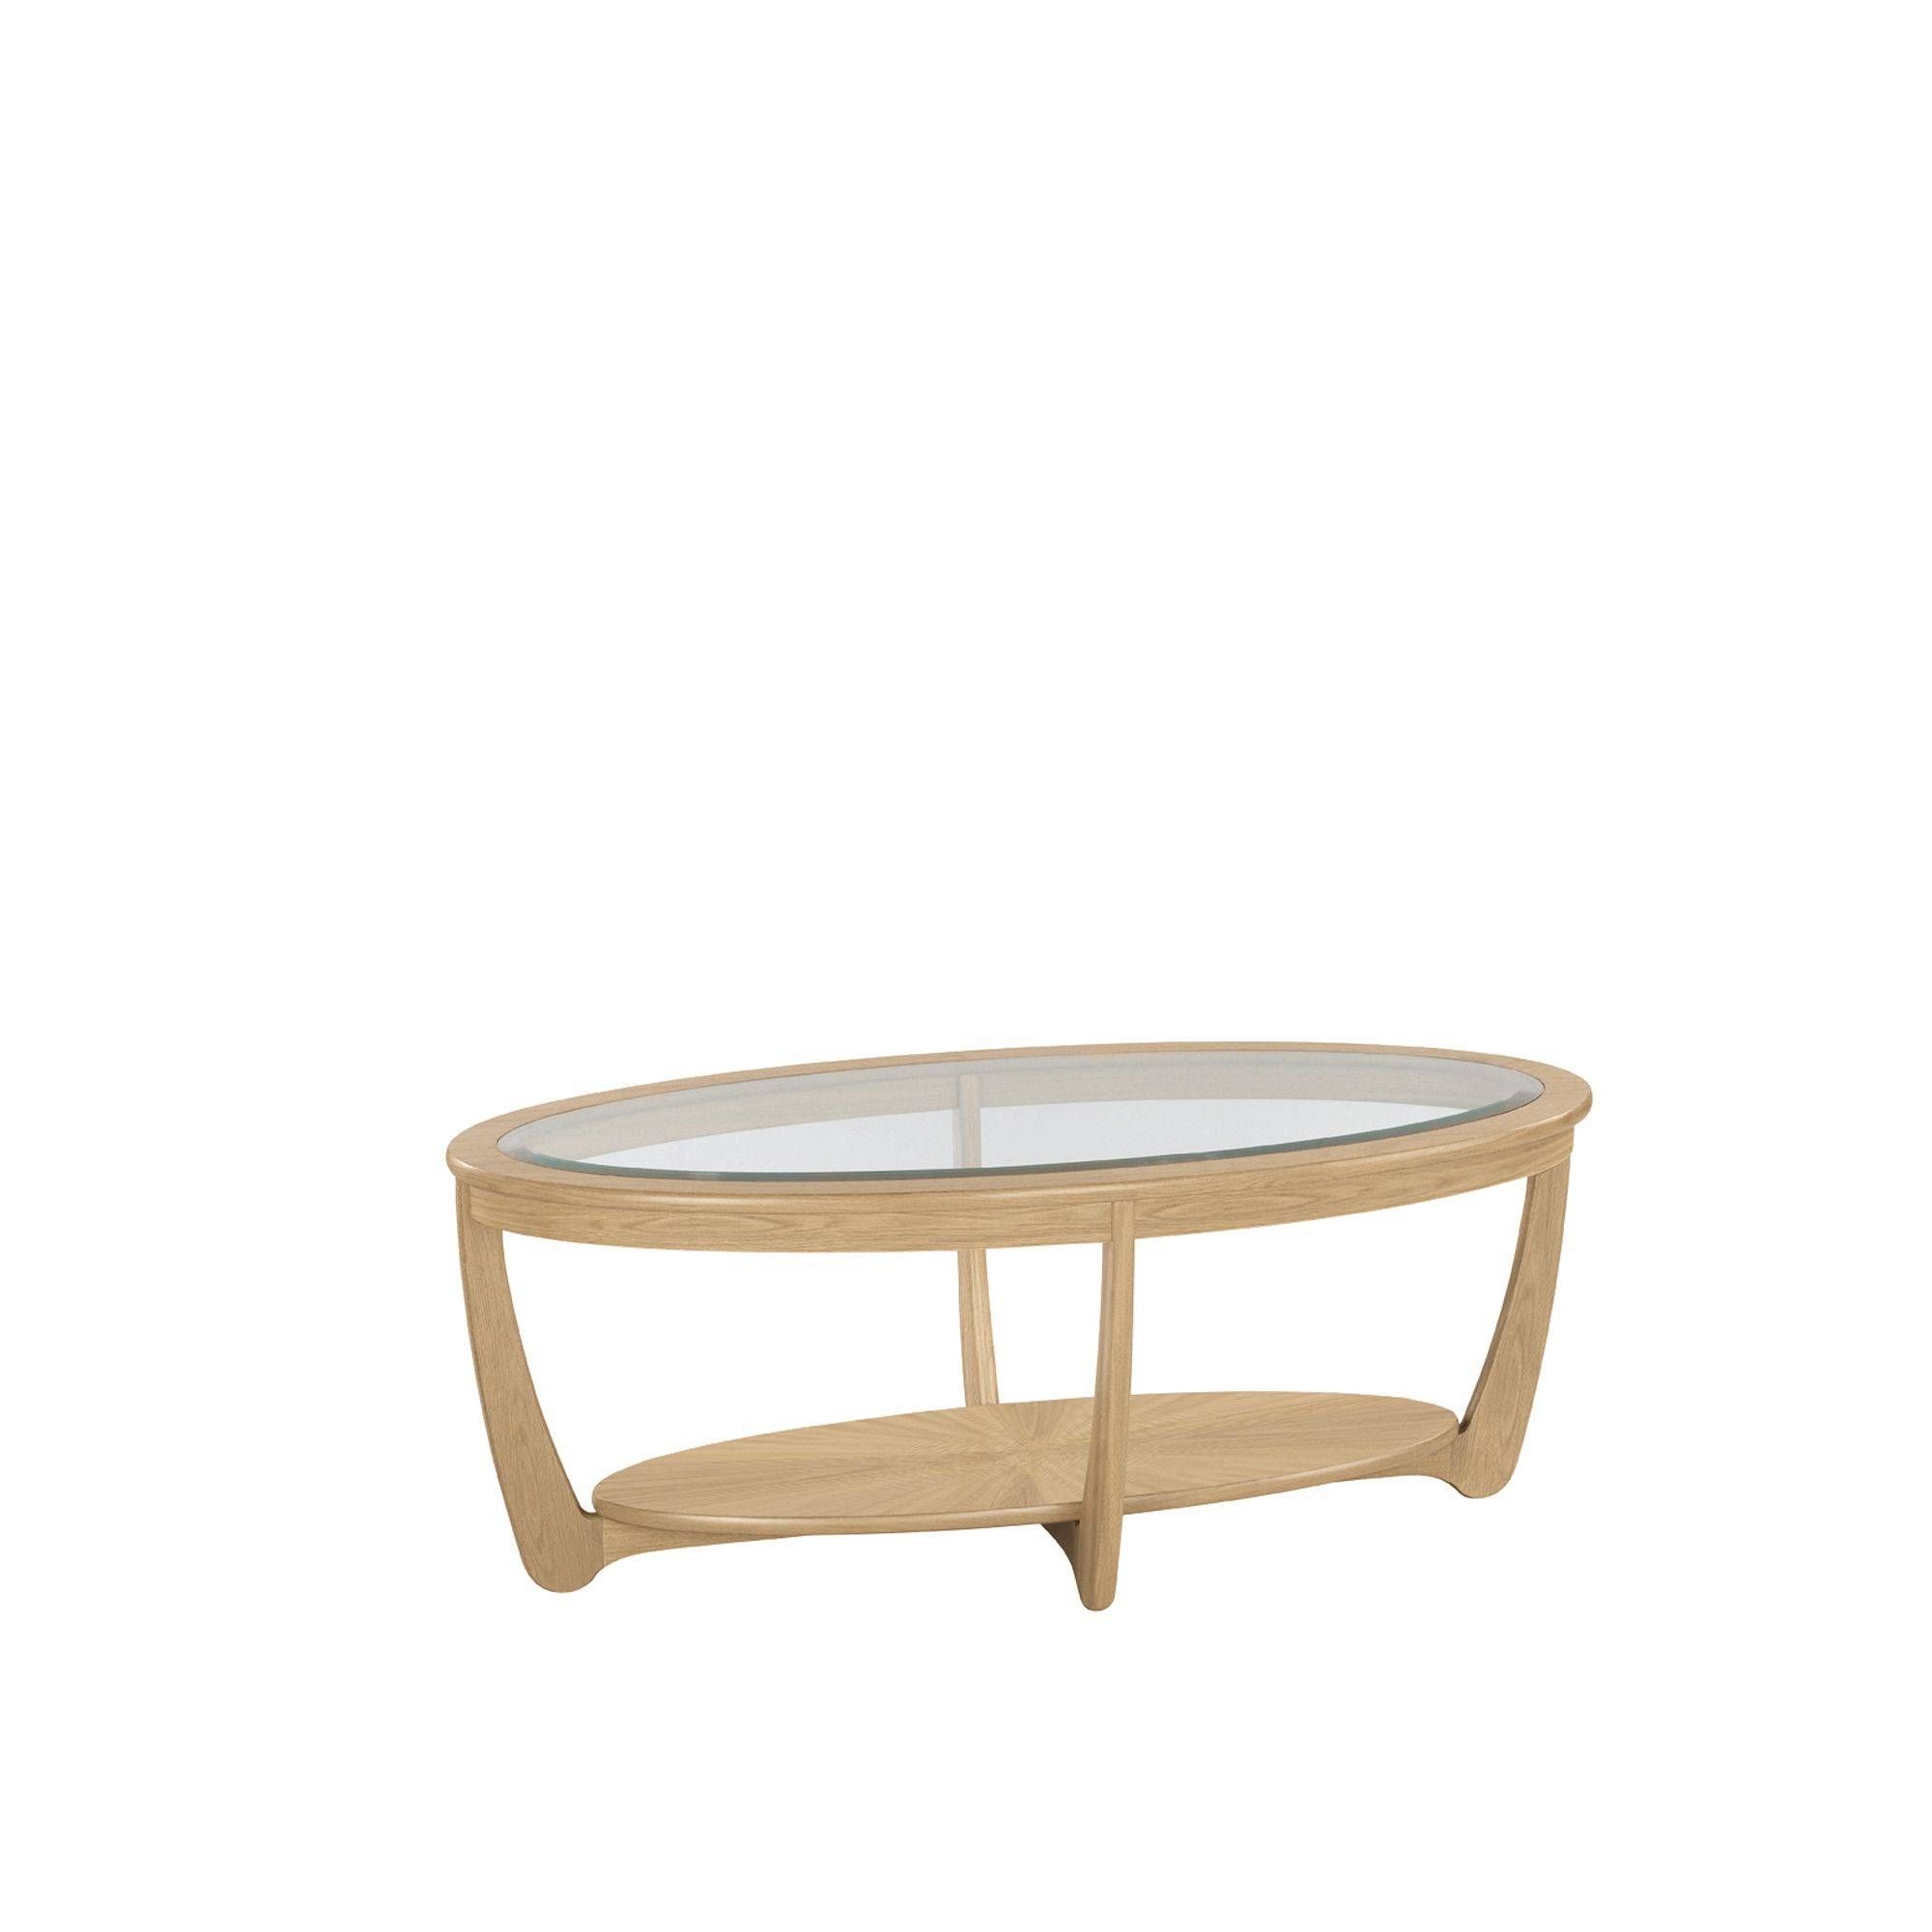 Nathan Shades Oak Glass Top Oval Coffee Table – Coffee Tables Inside Oak And Glass Coffee Table (View 1 of 15)